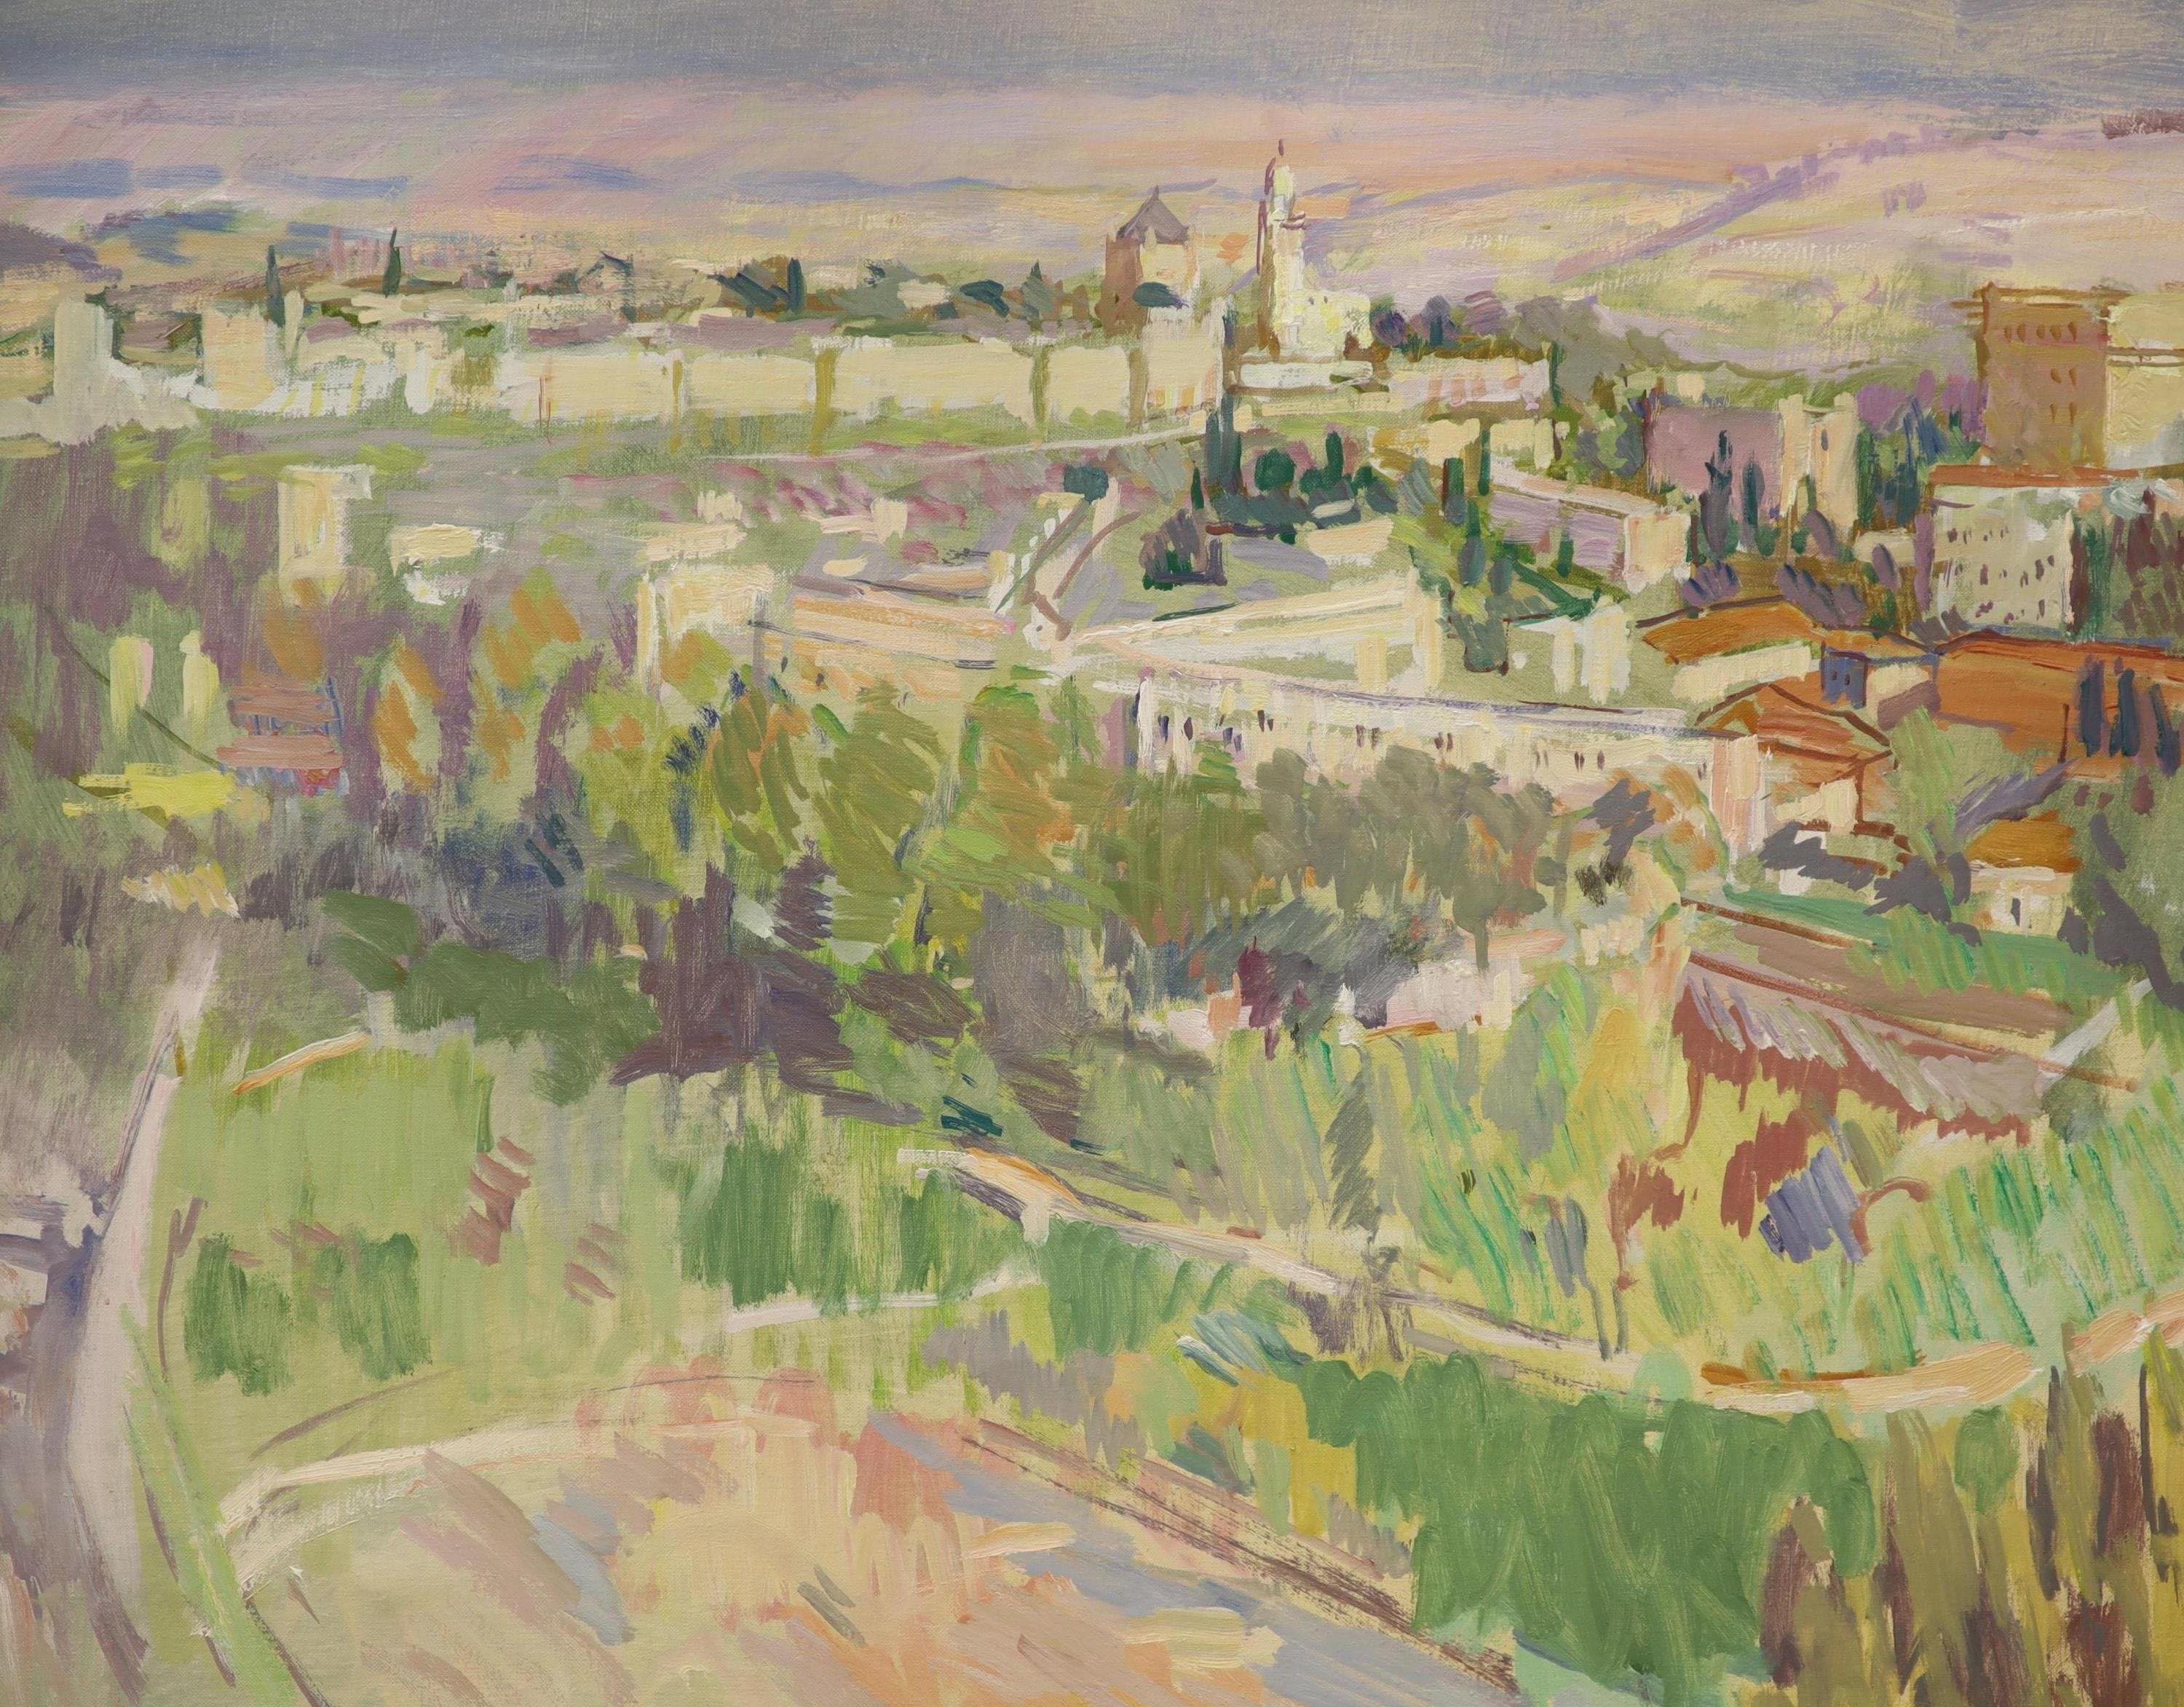 David Graham, oil on canvas, The Old City, Jerusalem, signed and dated 1982 verso, 51 x 61cm